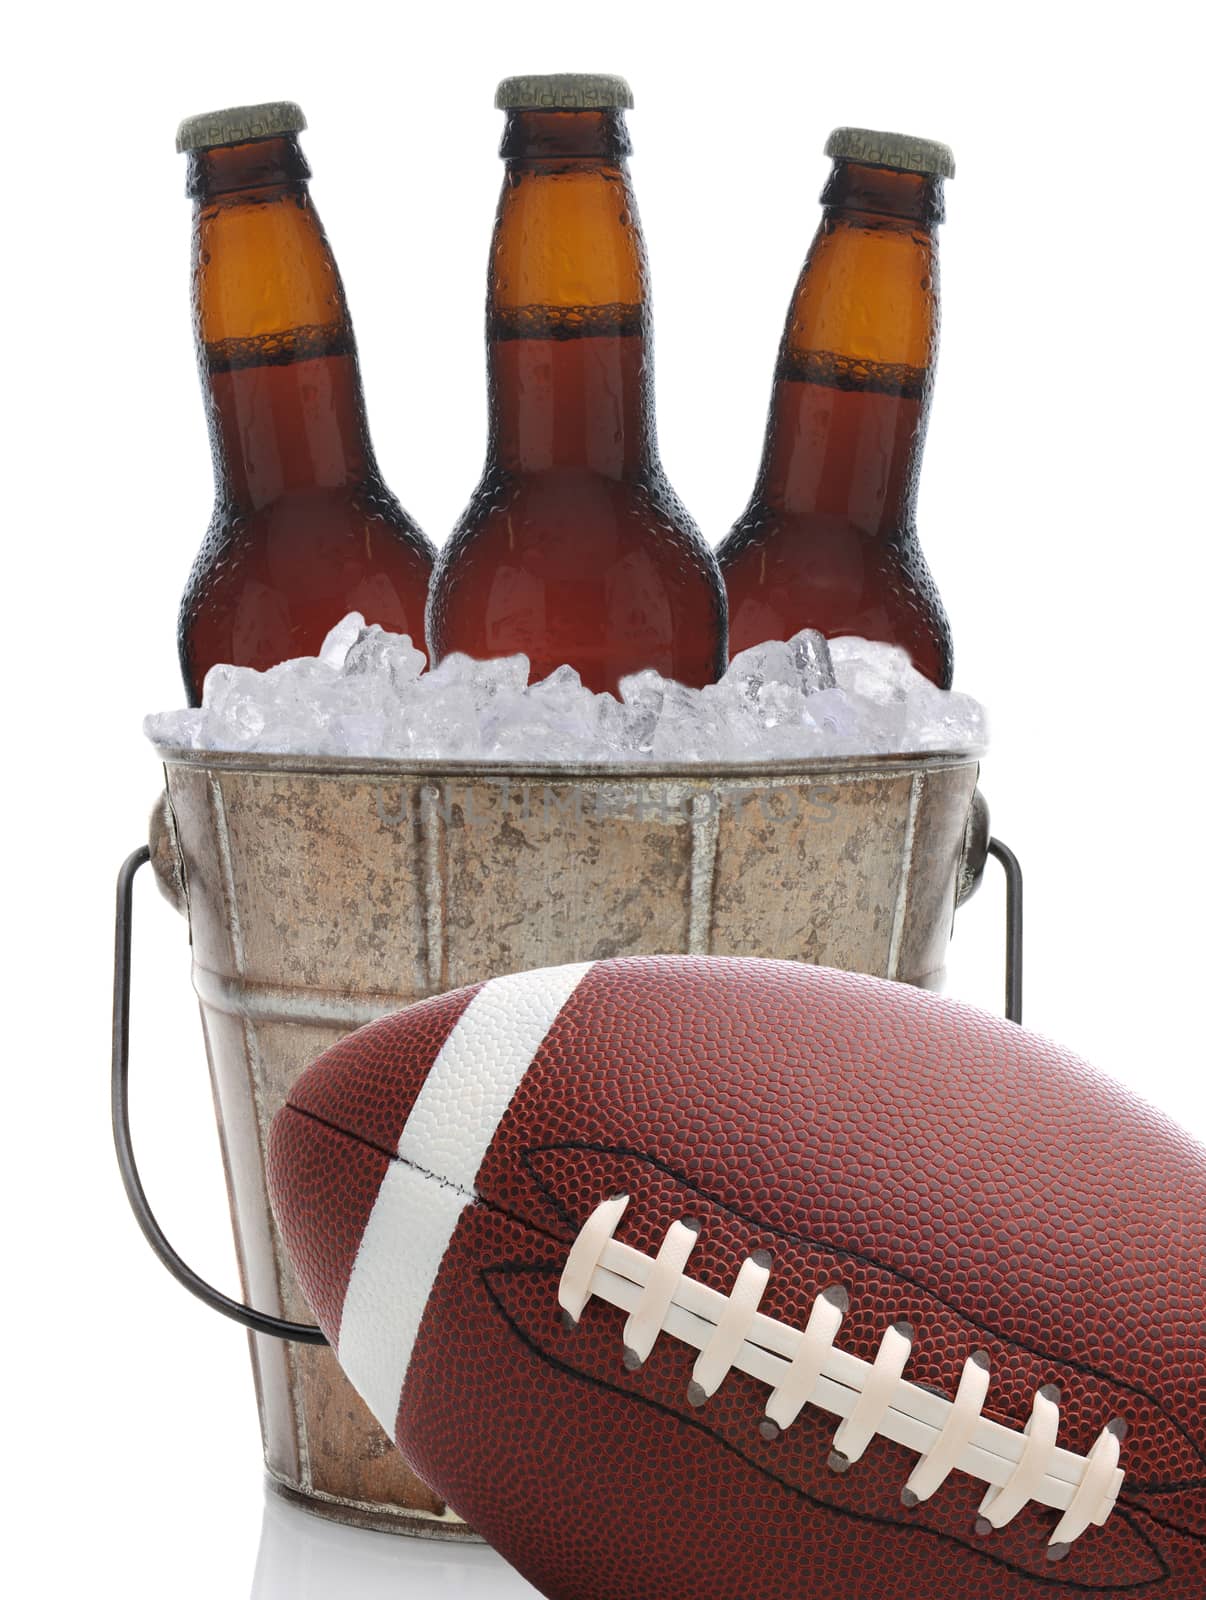 Football and Beer in Bucket by sCukrov